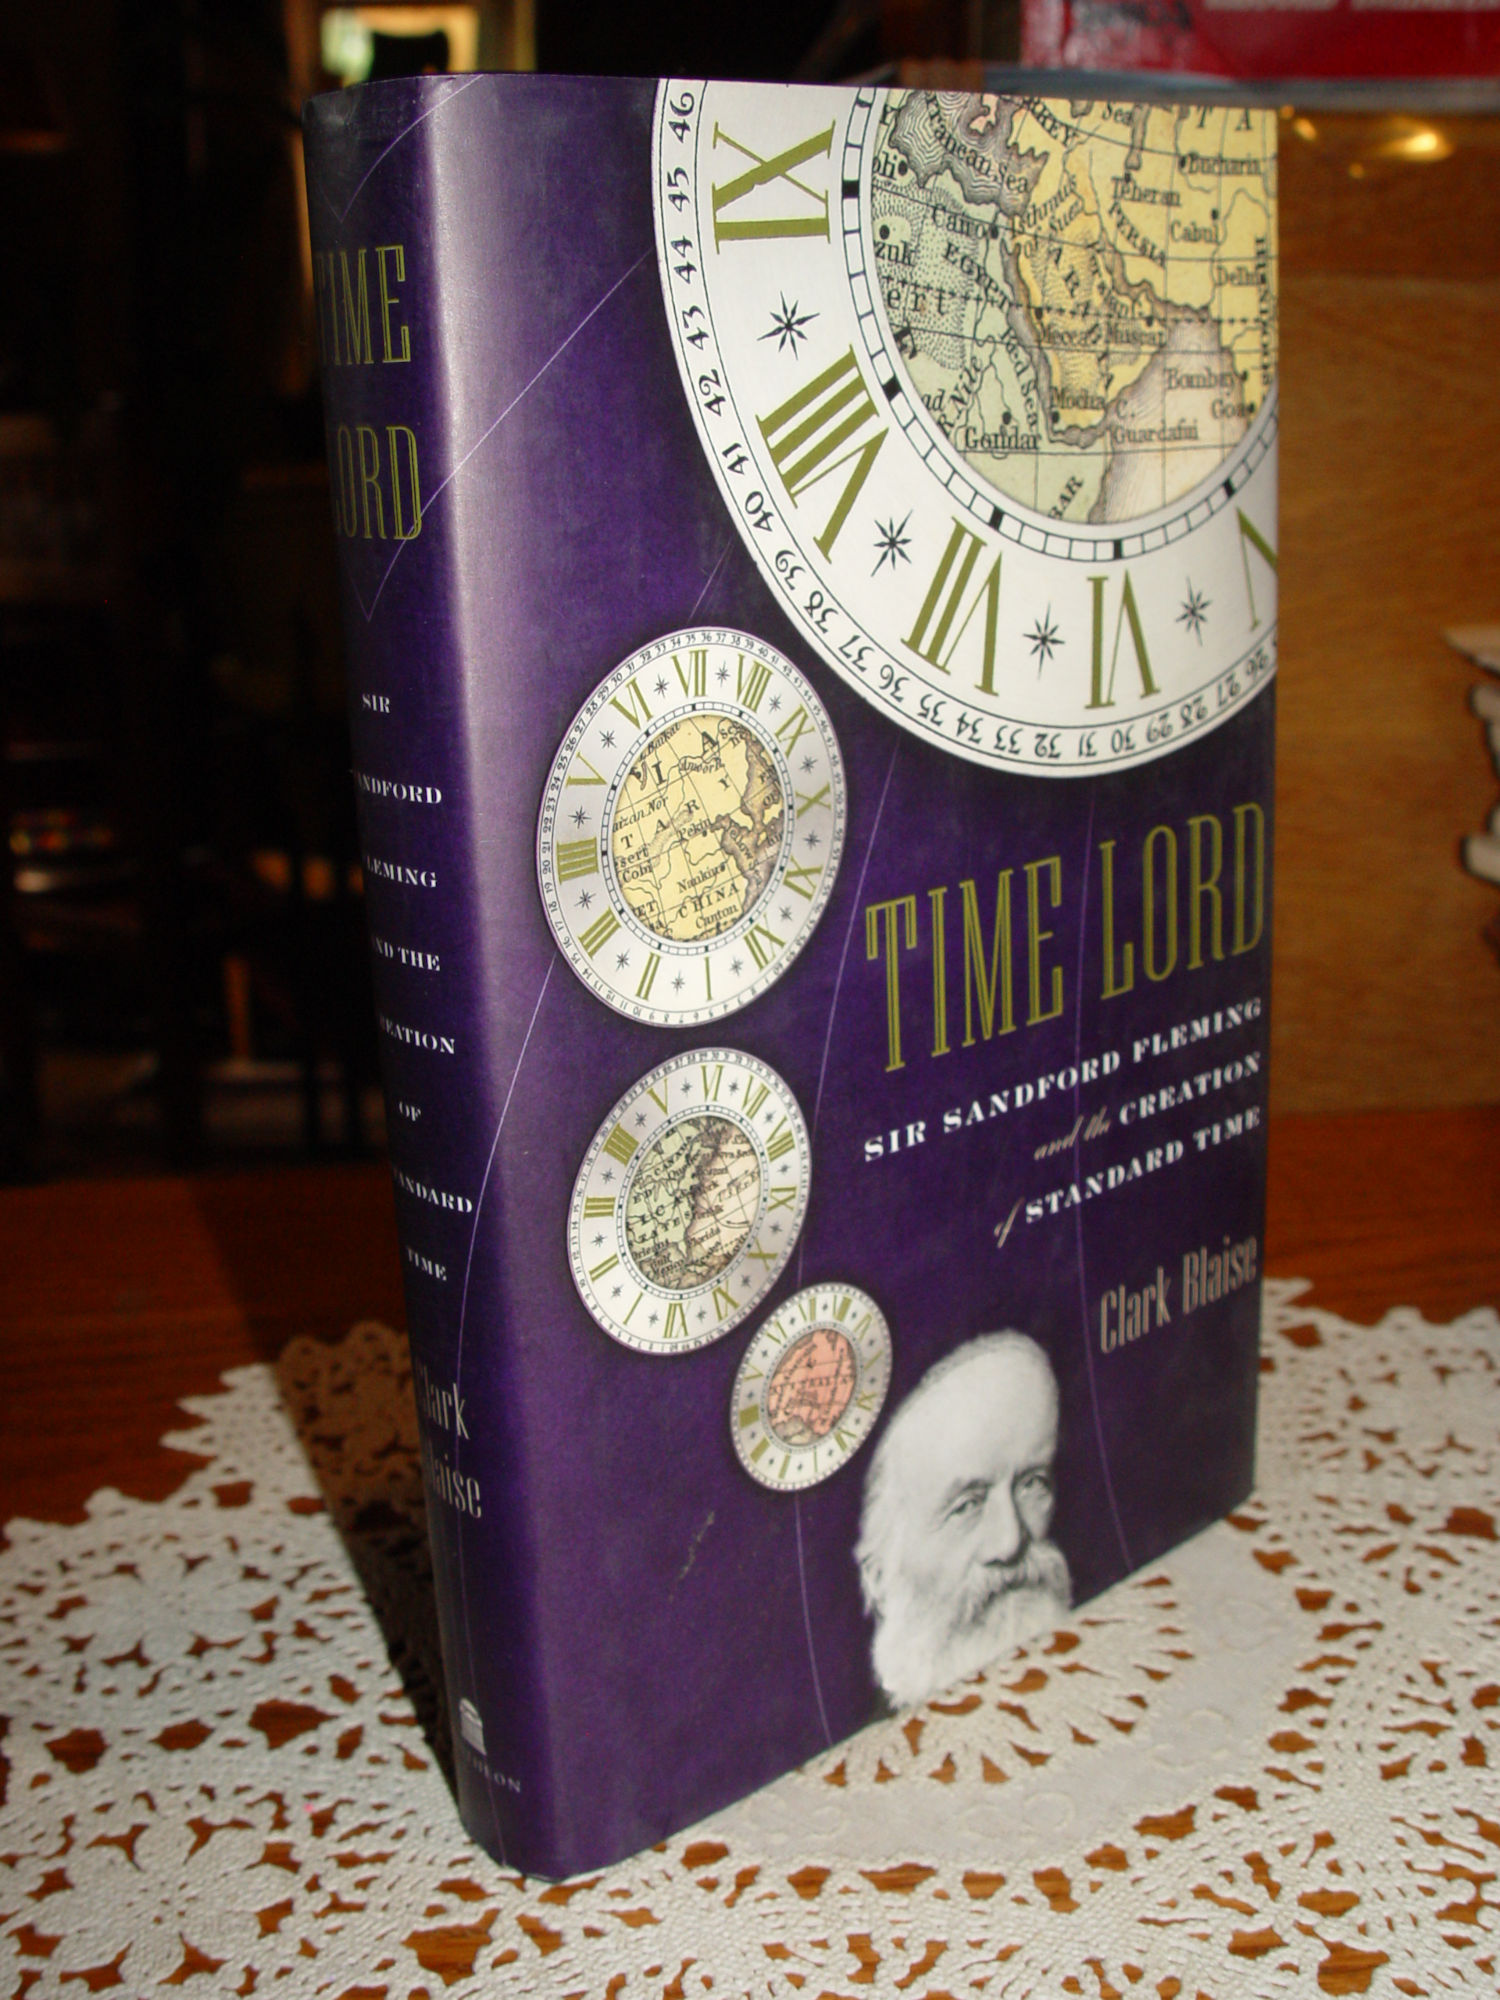 Time Lord: Sir Sandford Fleming and the
                        Creation of Standard Time, Clark Blaise 2000